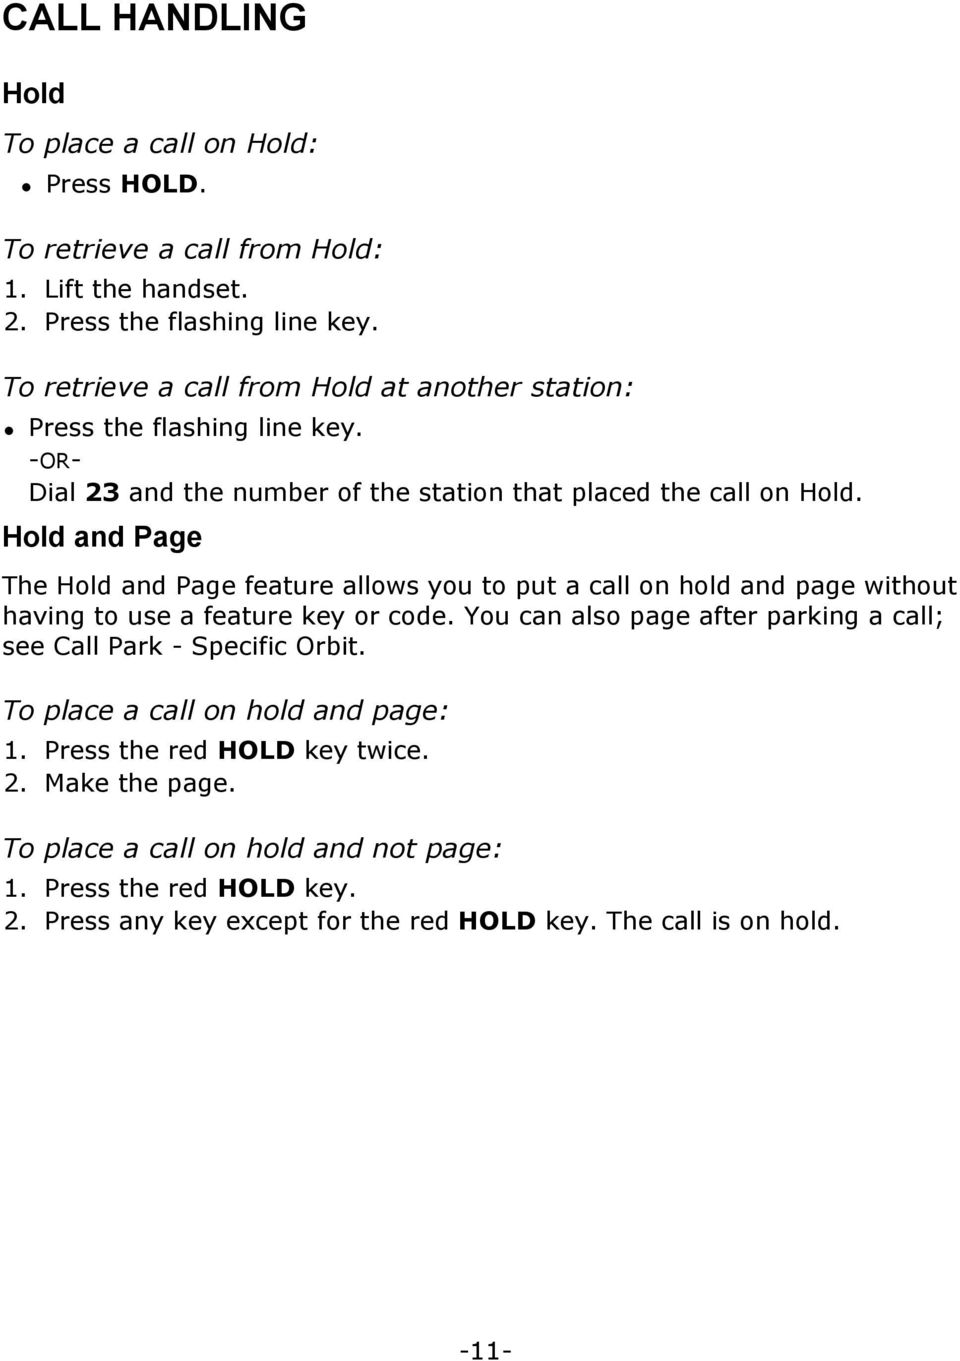 Hold and Page The Hold and Page feature allows you to put a call on hold and page without having to use a feature key or code.